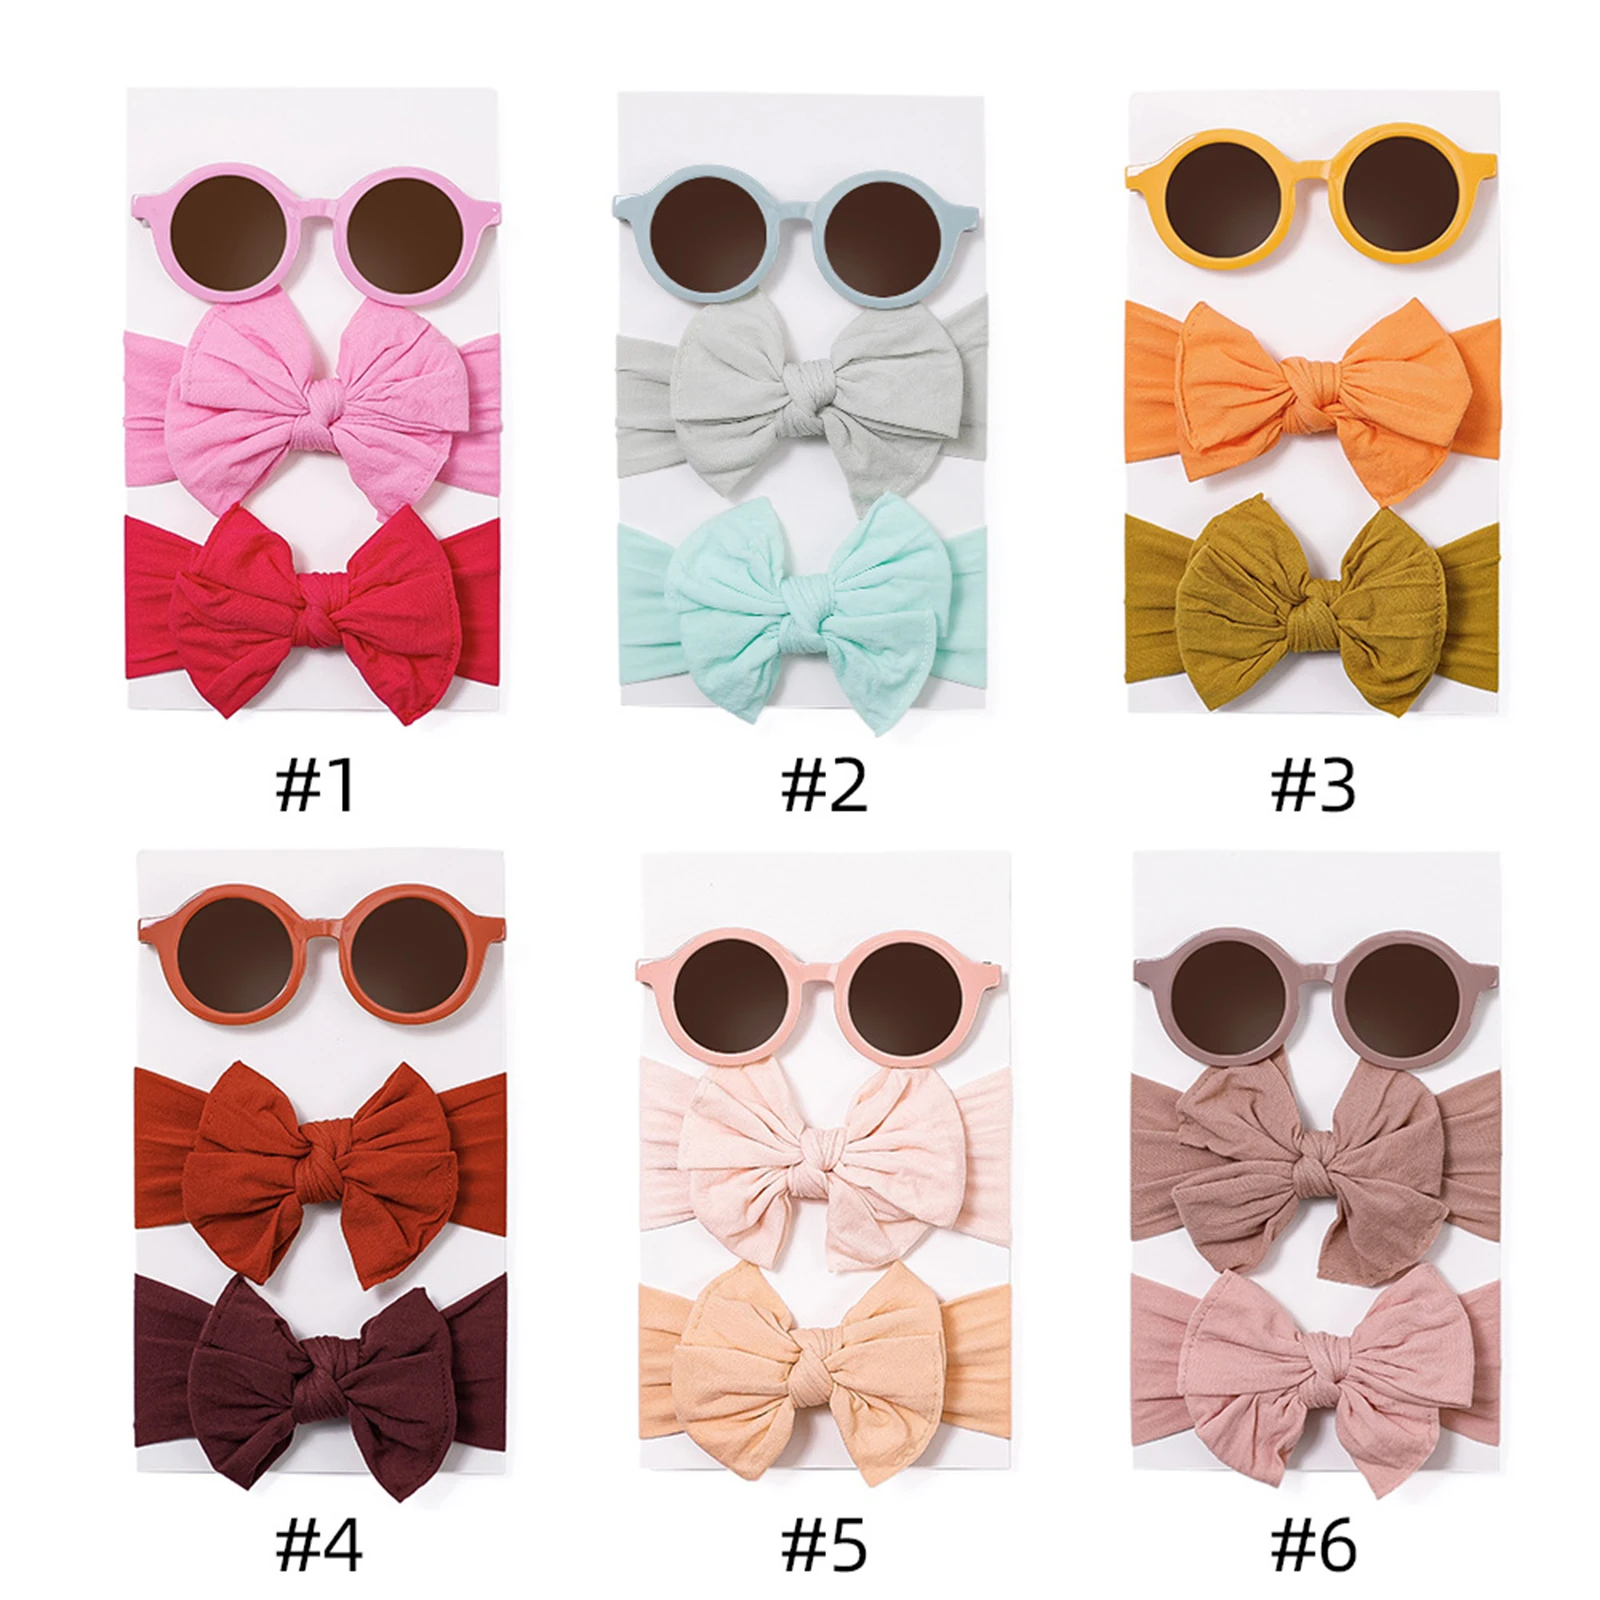 EWODOS Baby Kids Girls Headwear Sets Sunglasses with Headbands Round Sunglasses with Bow Hairbands Party Favor for Baby Kids 50 custom 50 sets of pink jewelry bag microfiber bag personalized with insert card earrings necklace bag wedding favor logo